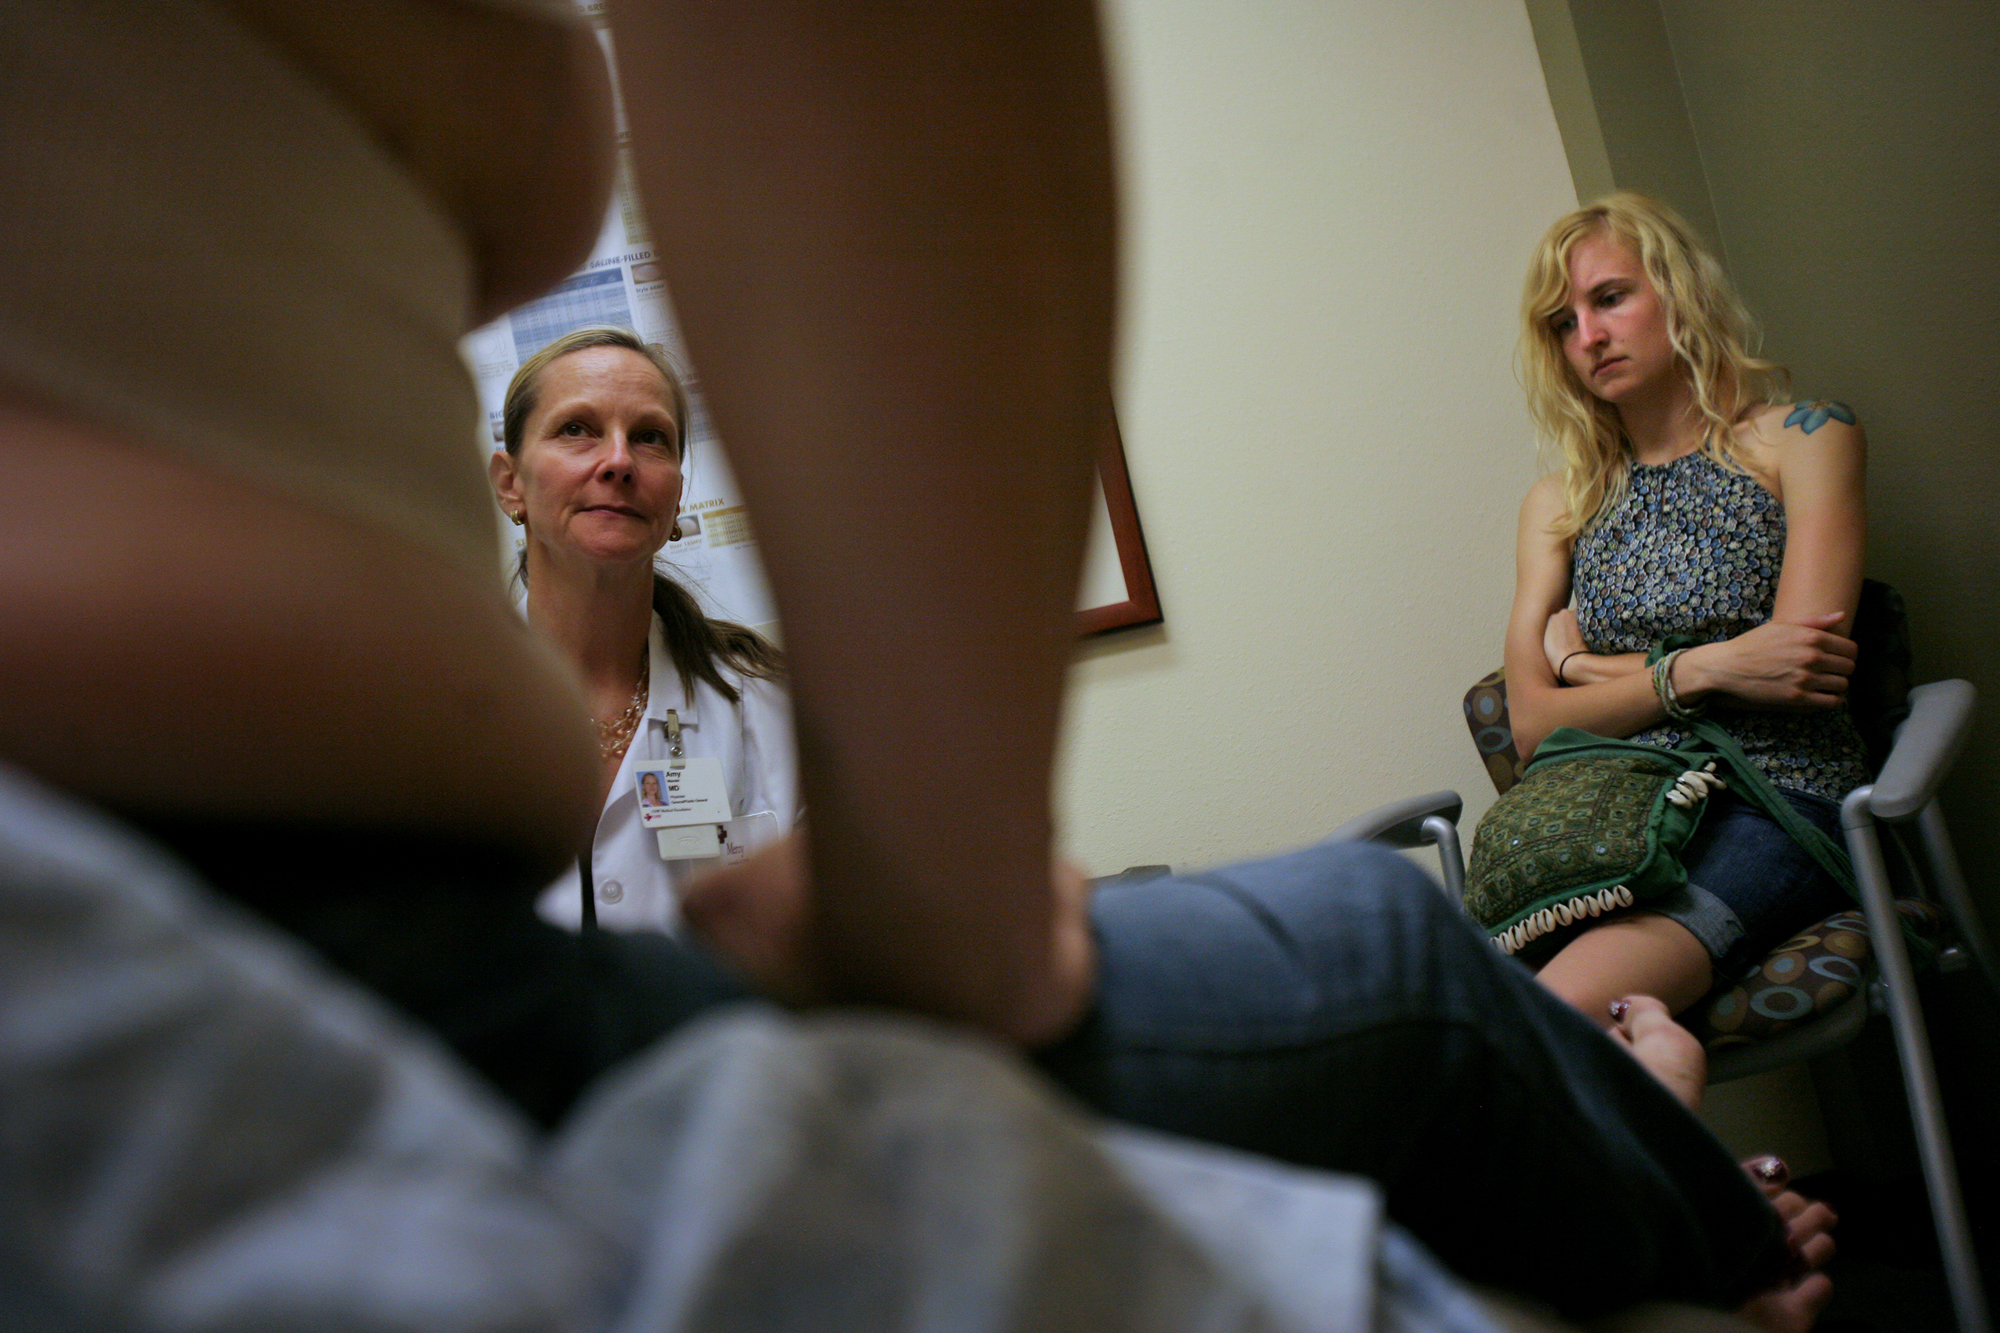  Elena's youngest daughter, Gina, 19, listens as Dr. Amy Wandel consults Elena on her recent breast enhancement surgery. In the first year of her transition, Elena had said she did not want breast surgery, and would be happy to continue wearing breas